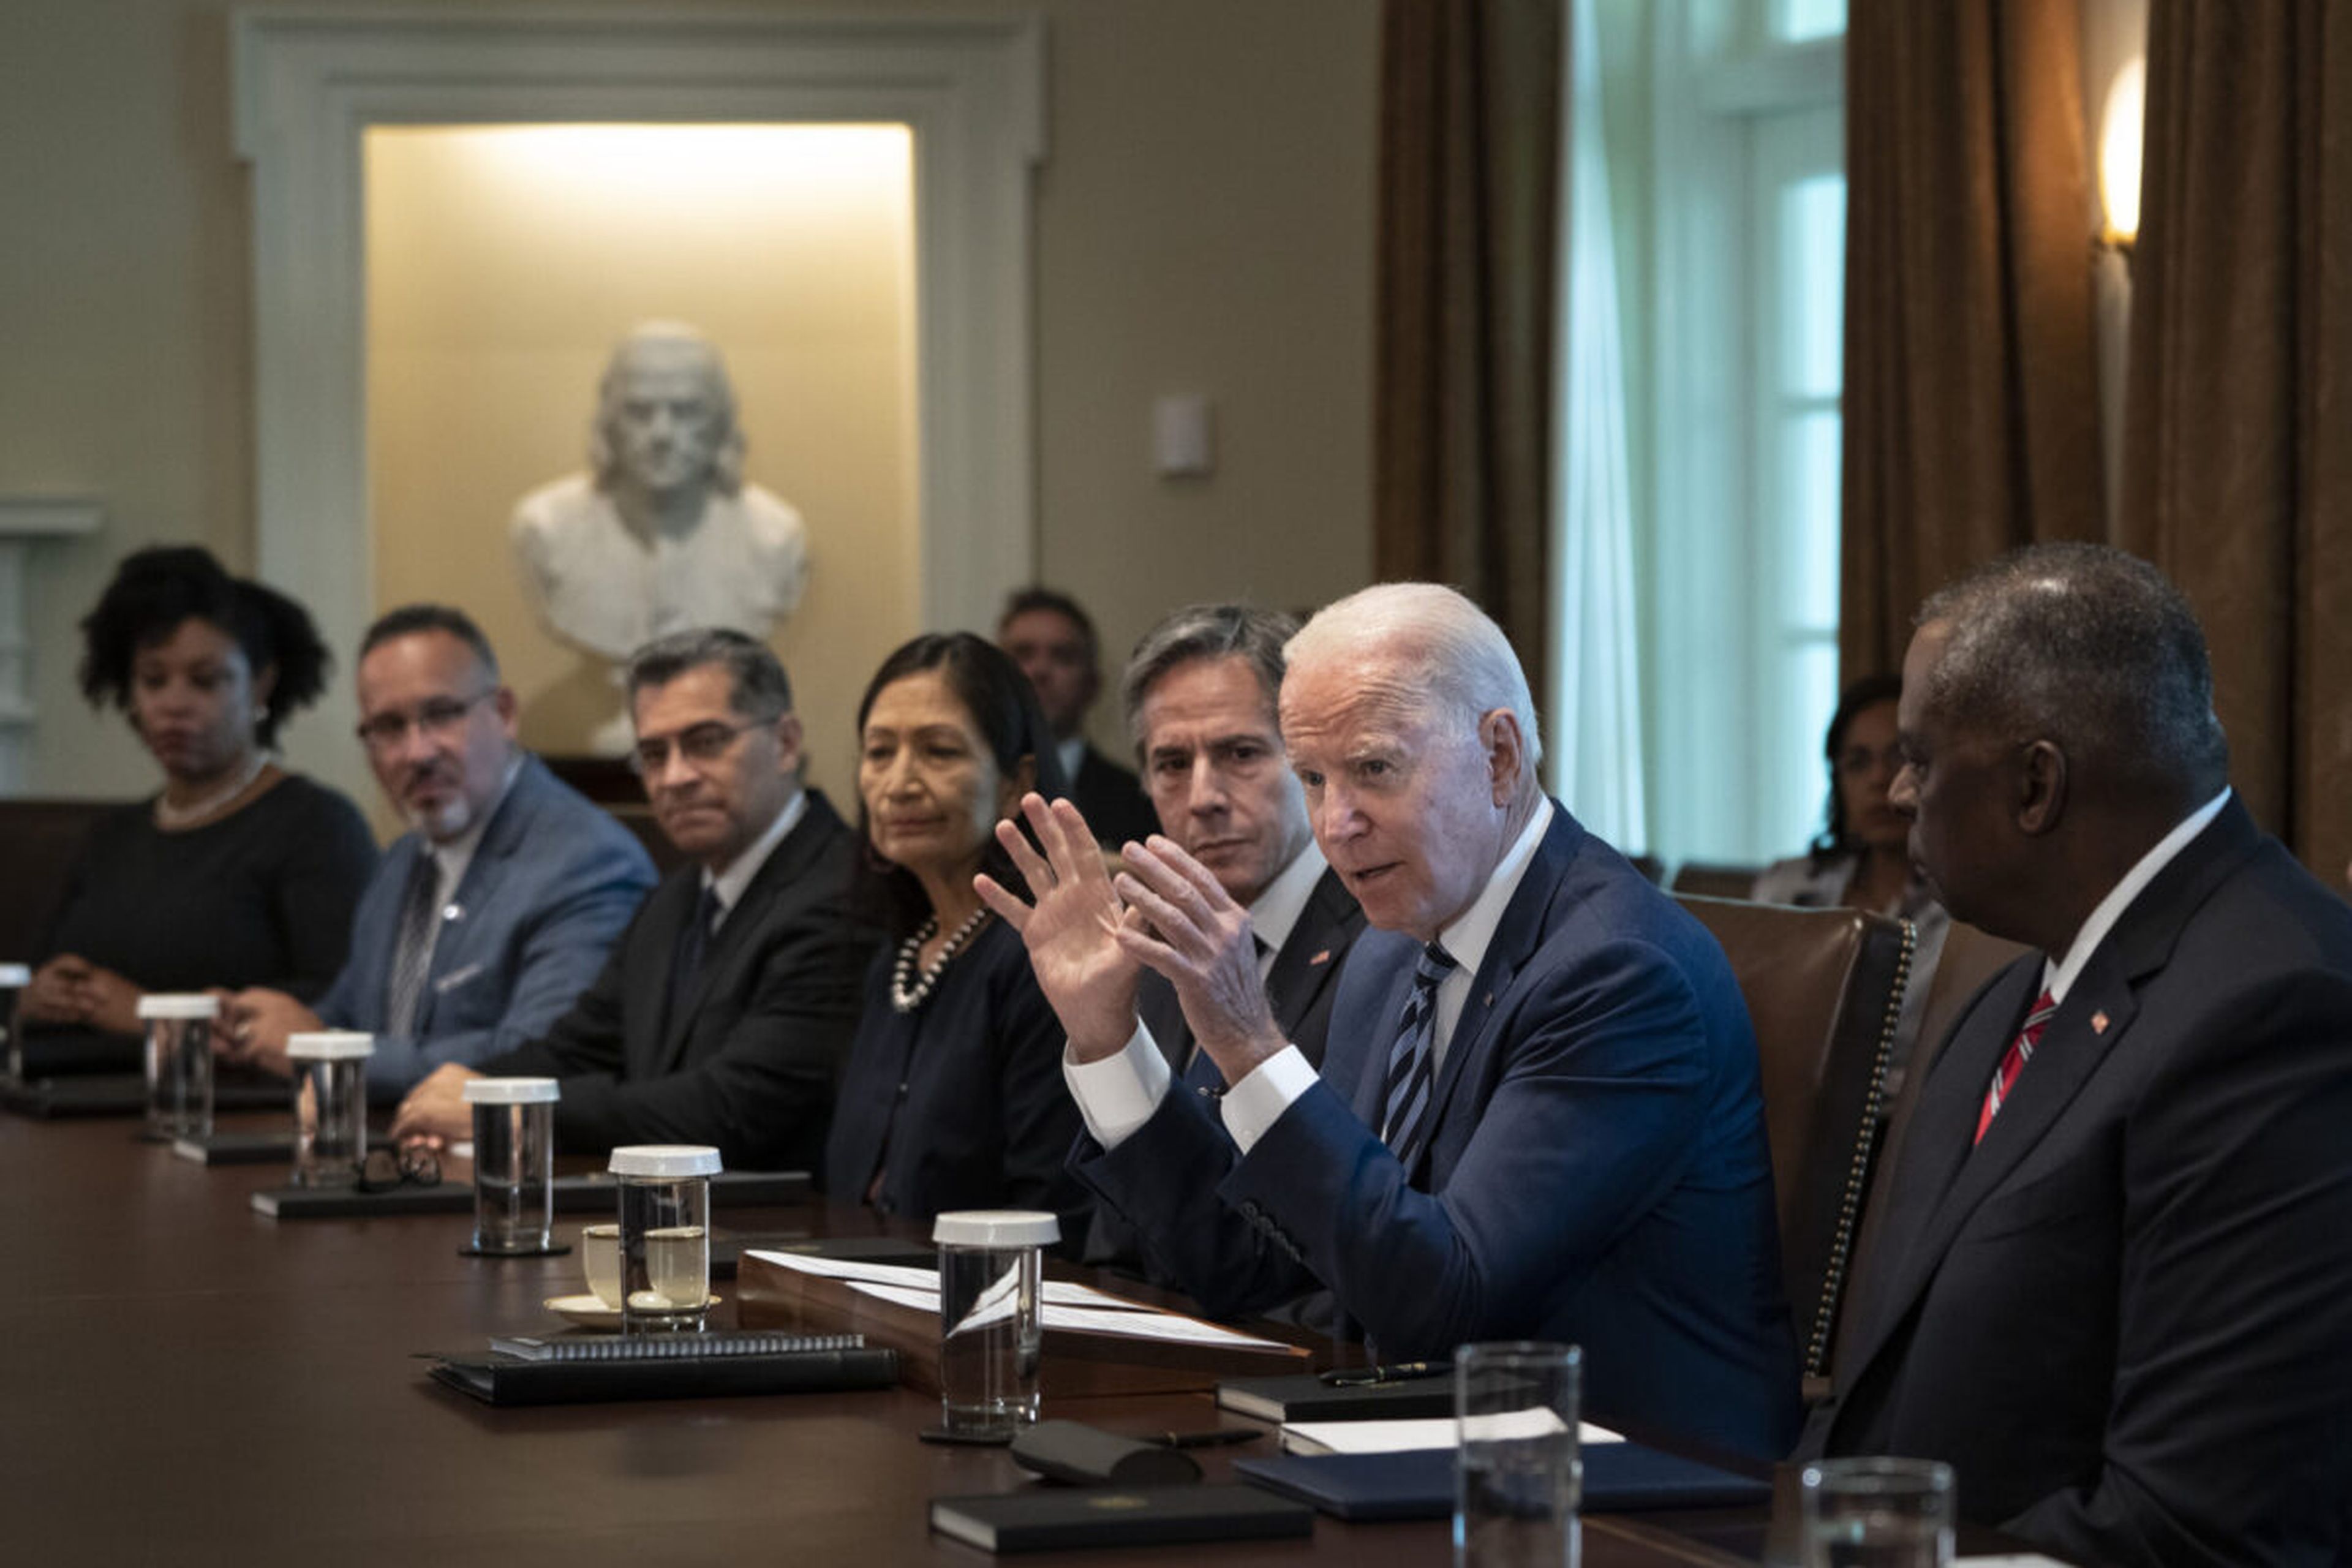 President Joe Biden speaks at the start of a Cabinet meeting at the White House on July 20, 2021, in Washington. The administration released it&#8217;s long-awaited cyber strategy Thursday, calling on American society to shift responsibility for insecure tech from users to manufacturers. (Photo by Drew Angerer/Getty Images)